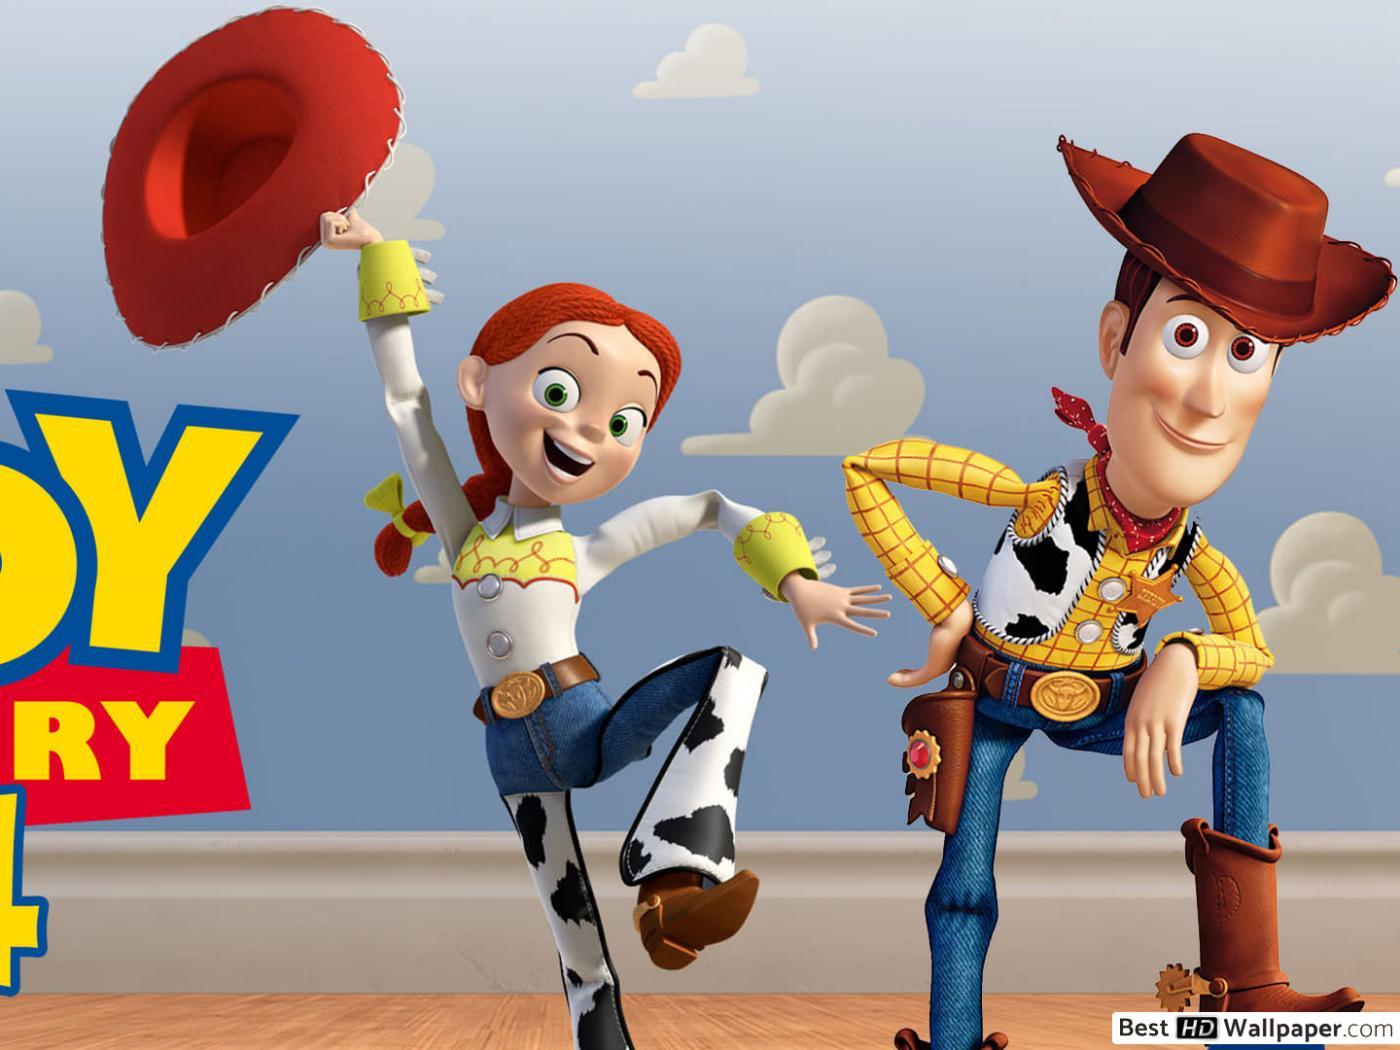 Toy story Wallpaper - NawPic